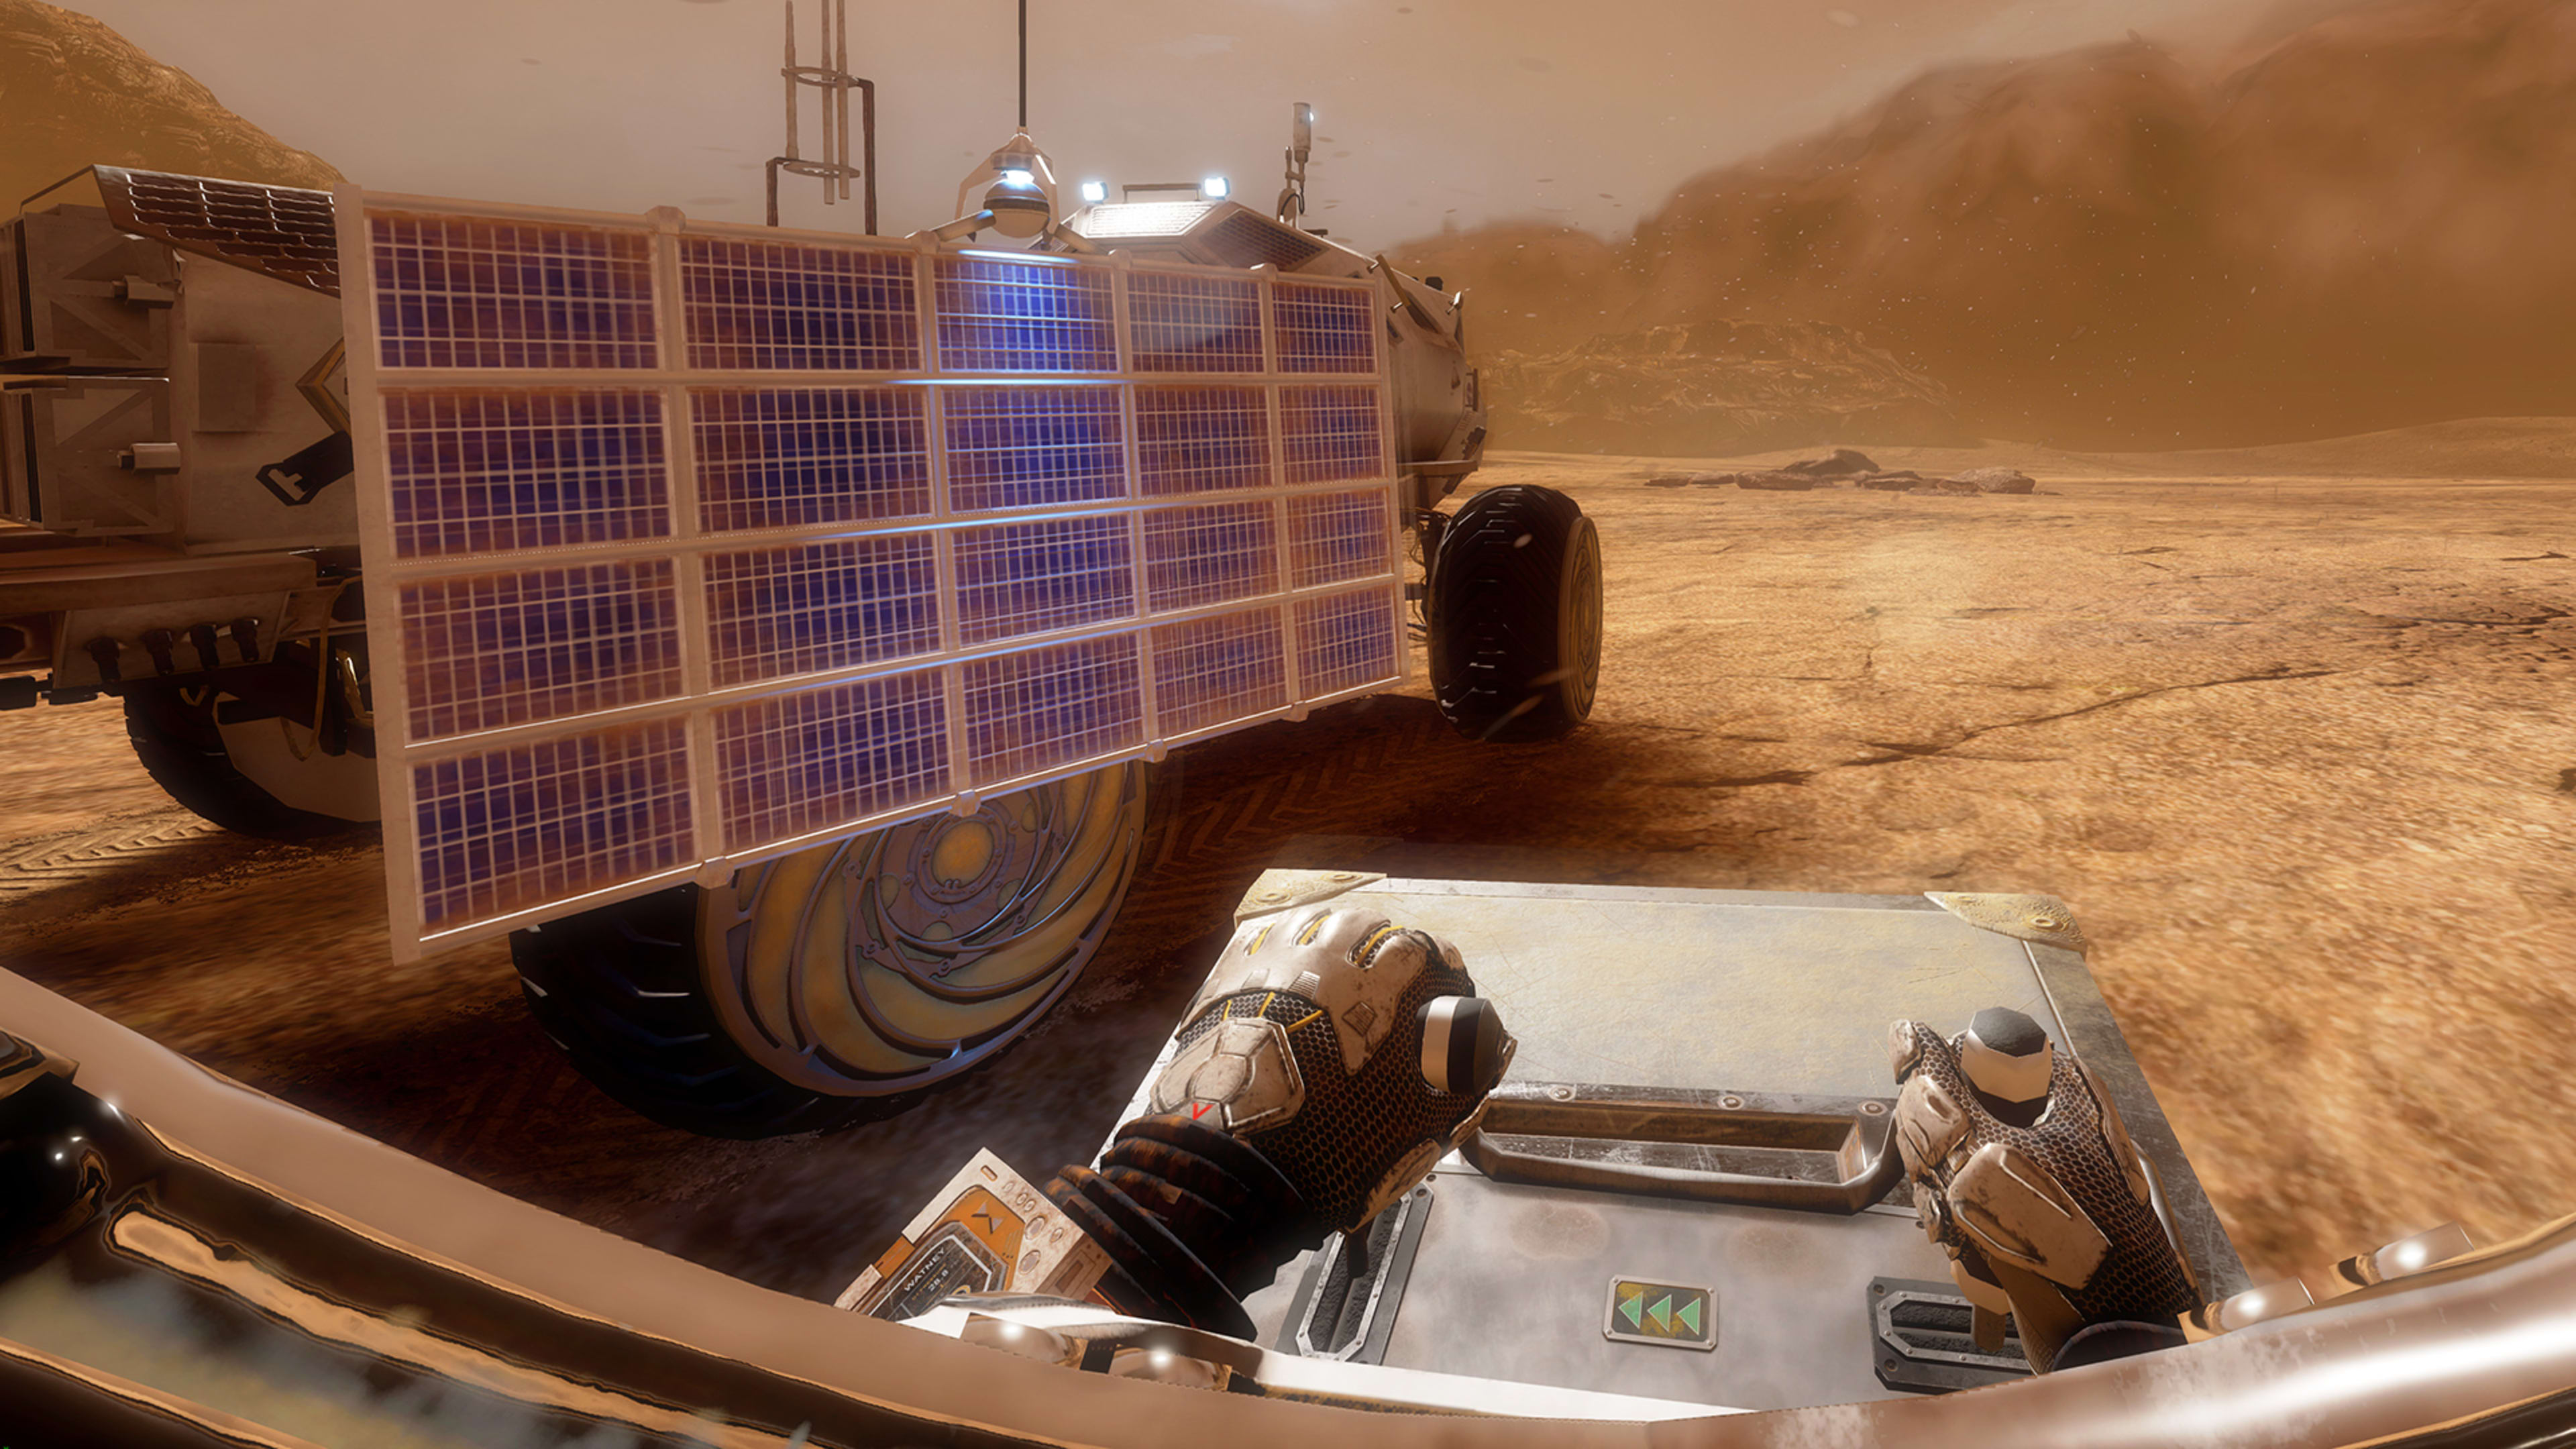 How Fox’s “The Martian VR Experience” Became Hollywood’s Most Ambitious VR Experiment